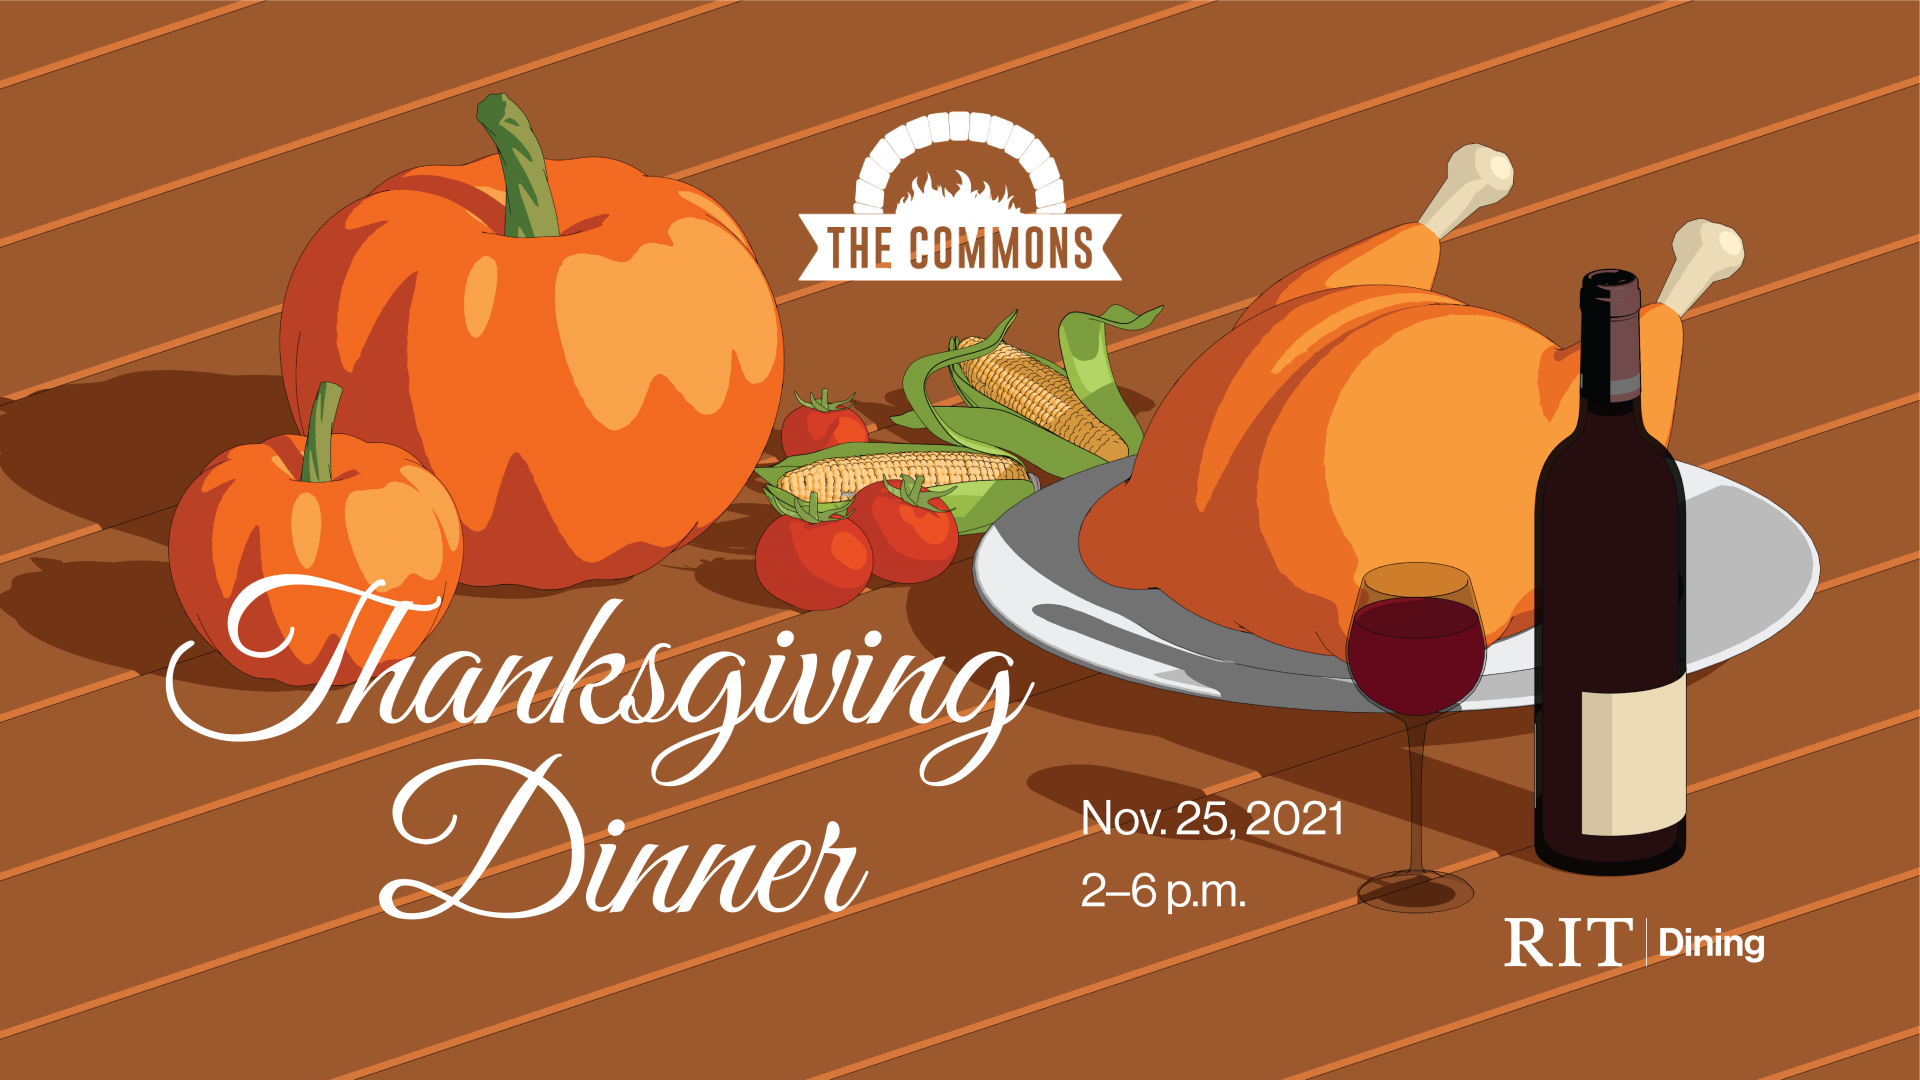 Thanksgiving Dinner at The Commons